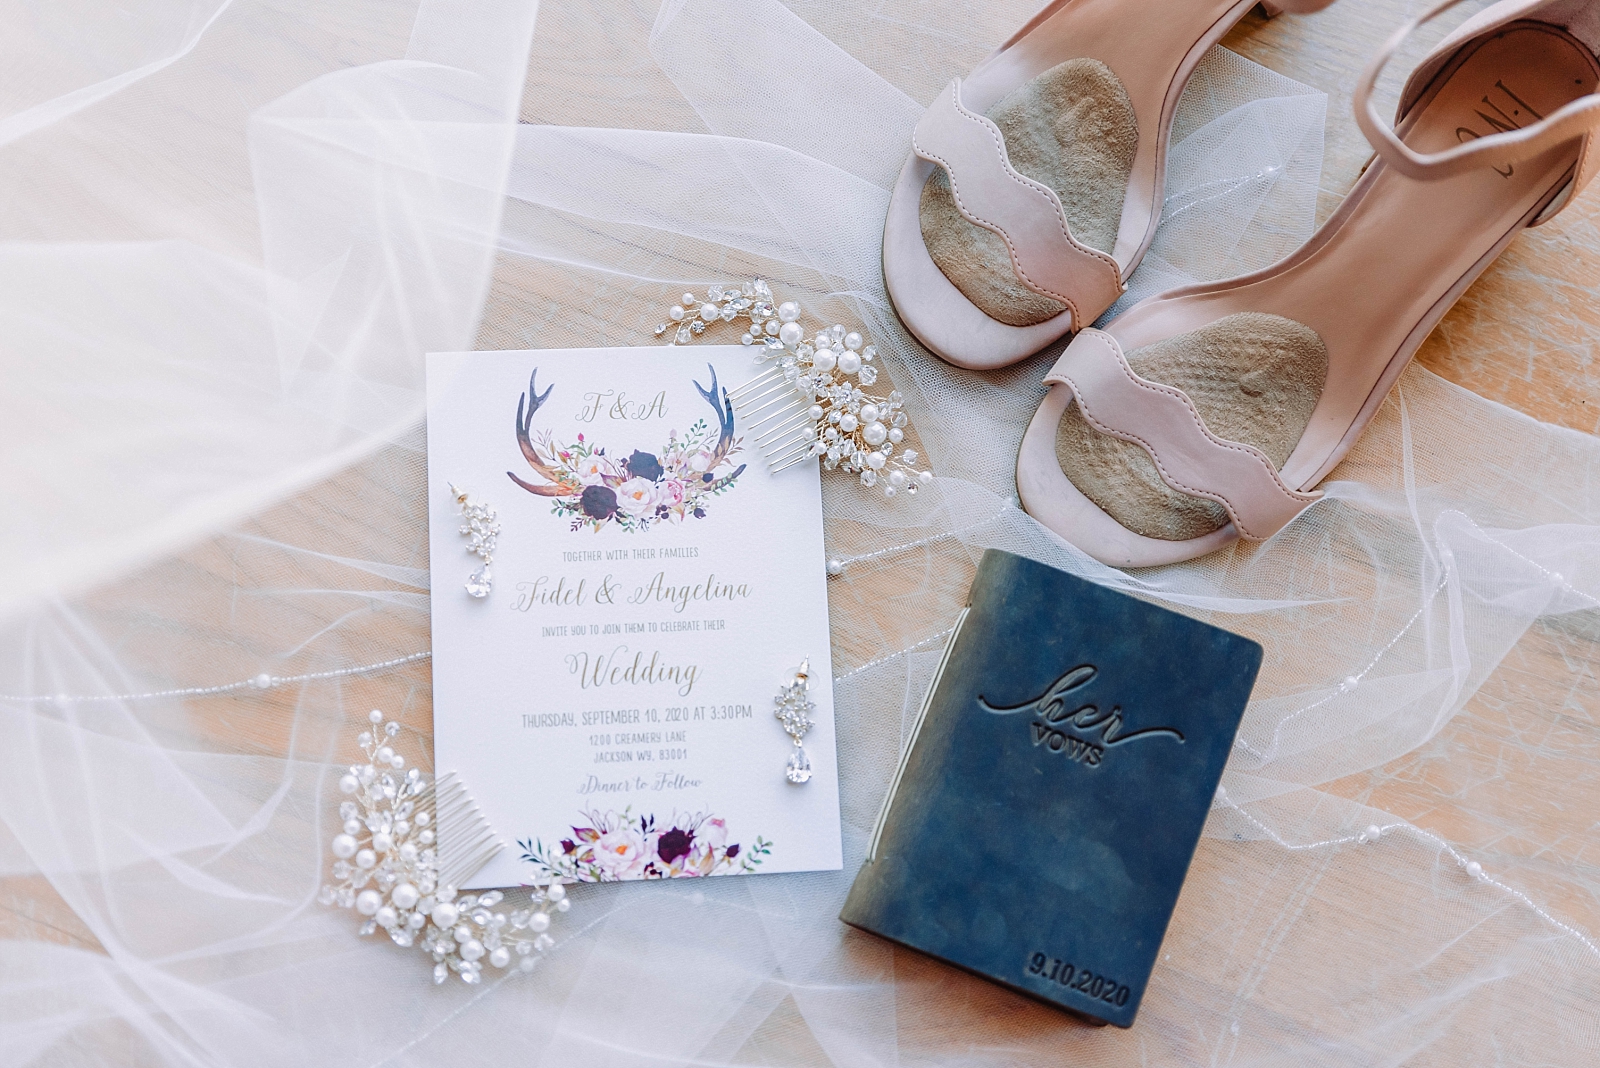 bridal details with wedding invitation on lace veil with silver bridal shoes